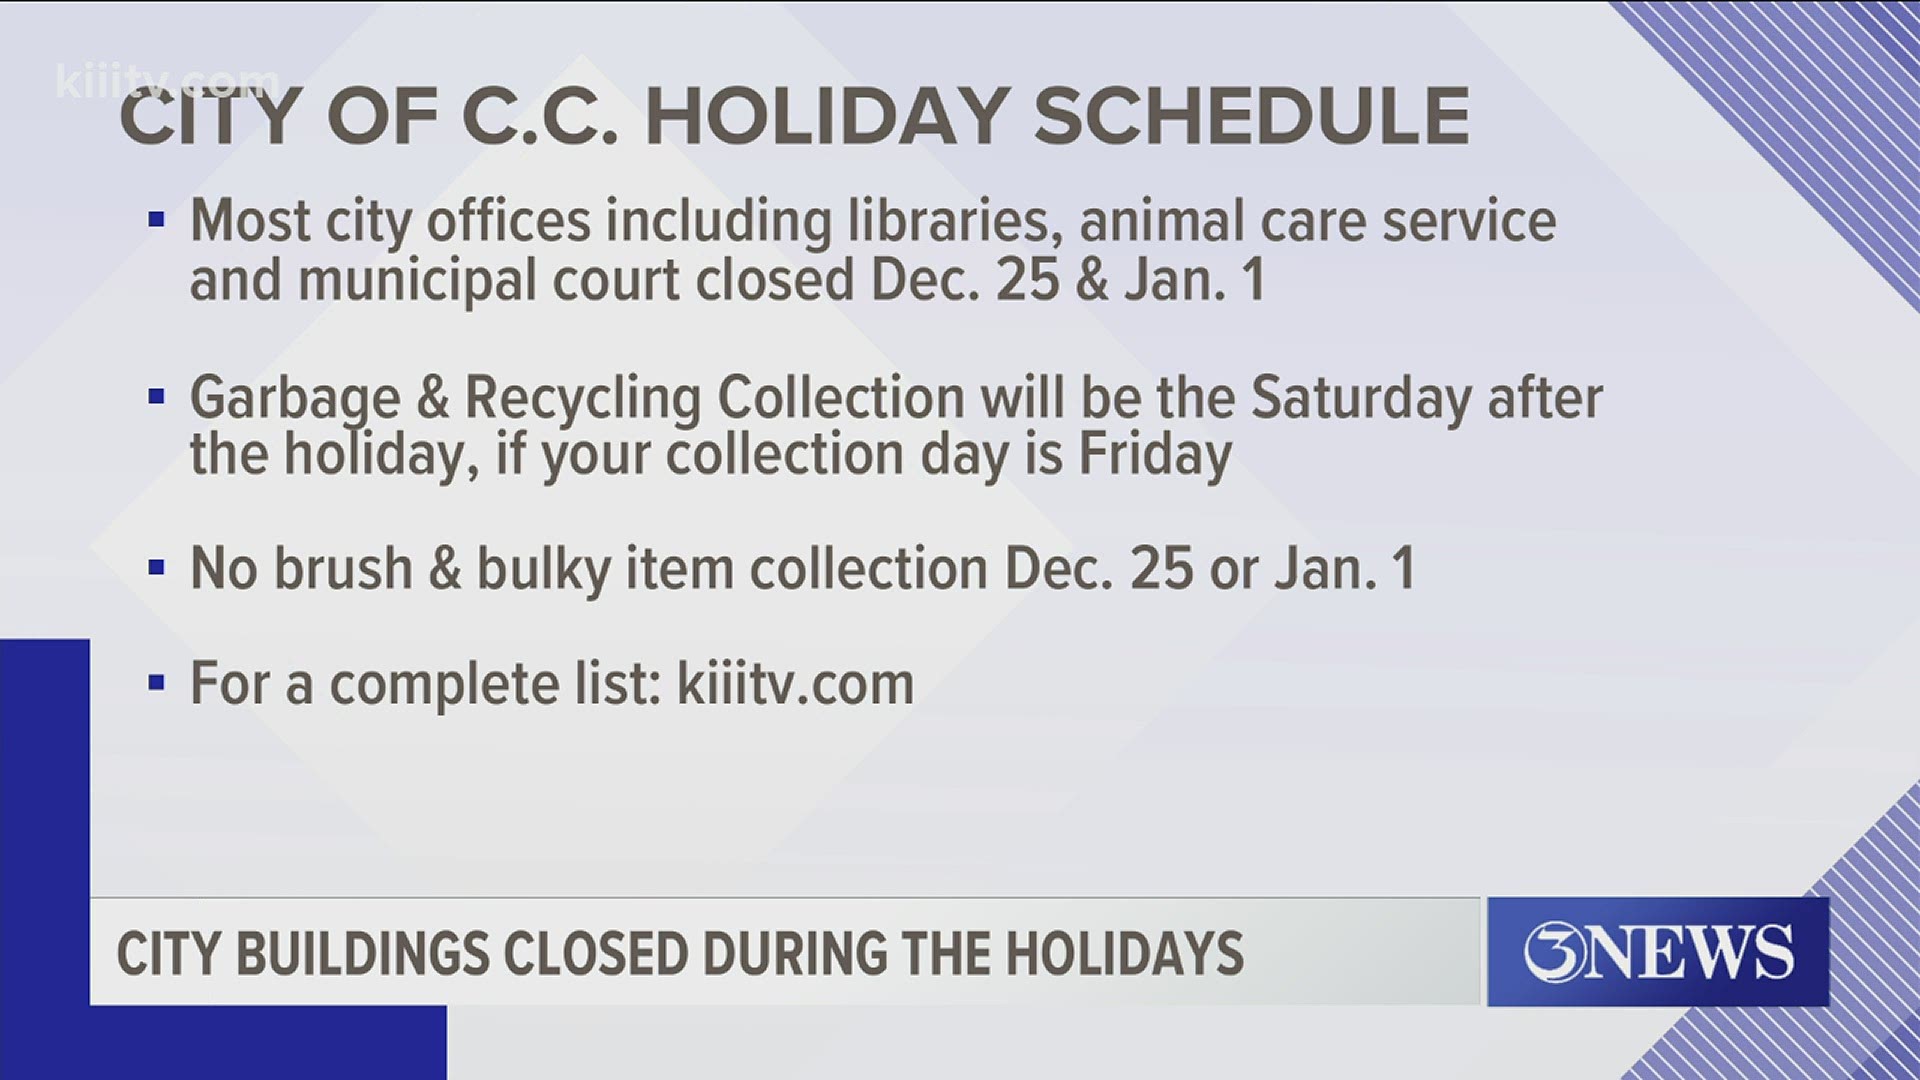 Garbage & Recycling Collection will be the Saturday after the holiday, if your scheduled collection day is Friday.